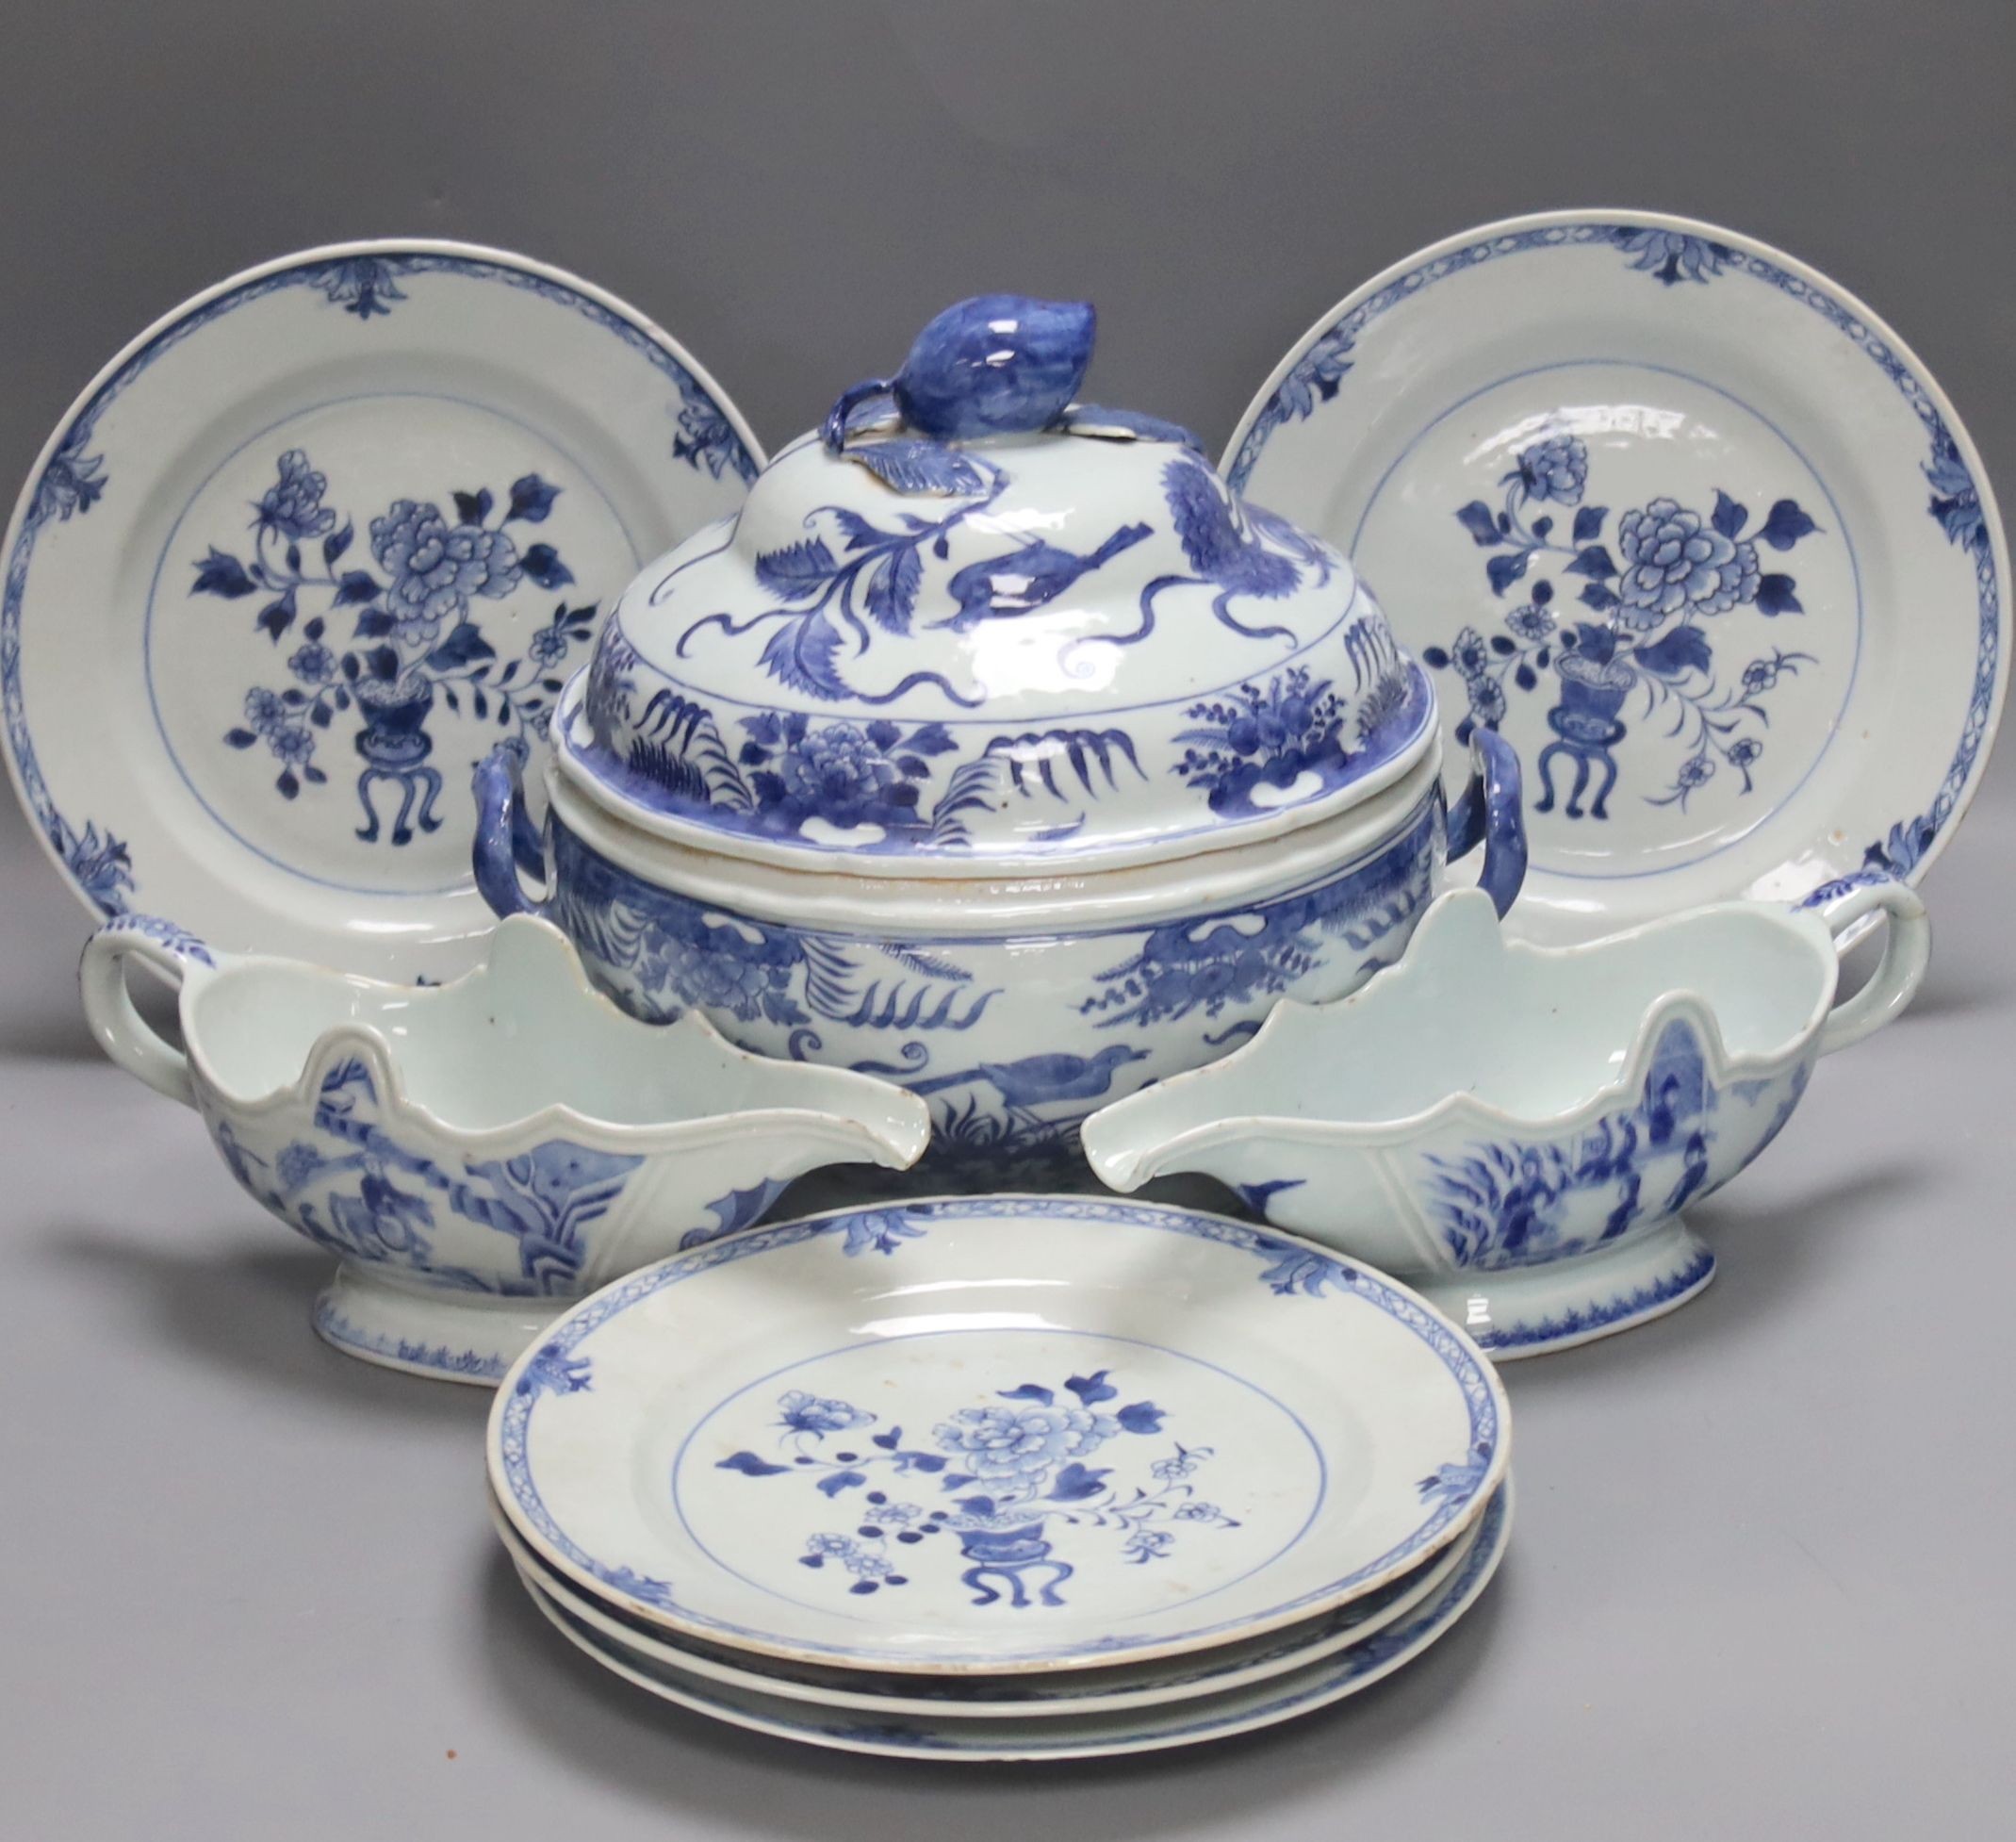 An 18th century Chinese Export blue and white octagonal tureen and cover, decorated with birds and flowers, a pair of similar sauceboats and five plates decorated with urns of flowers